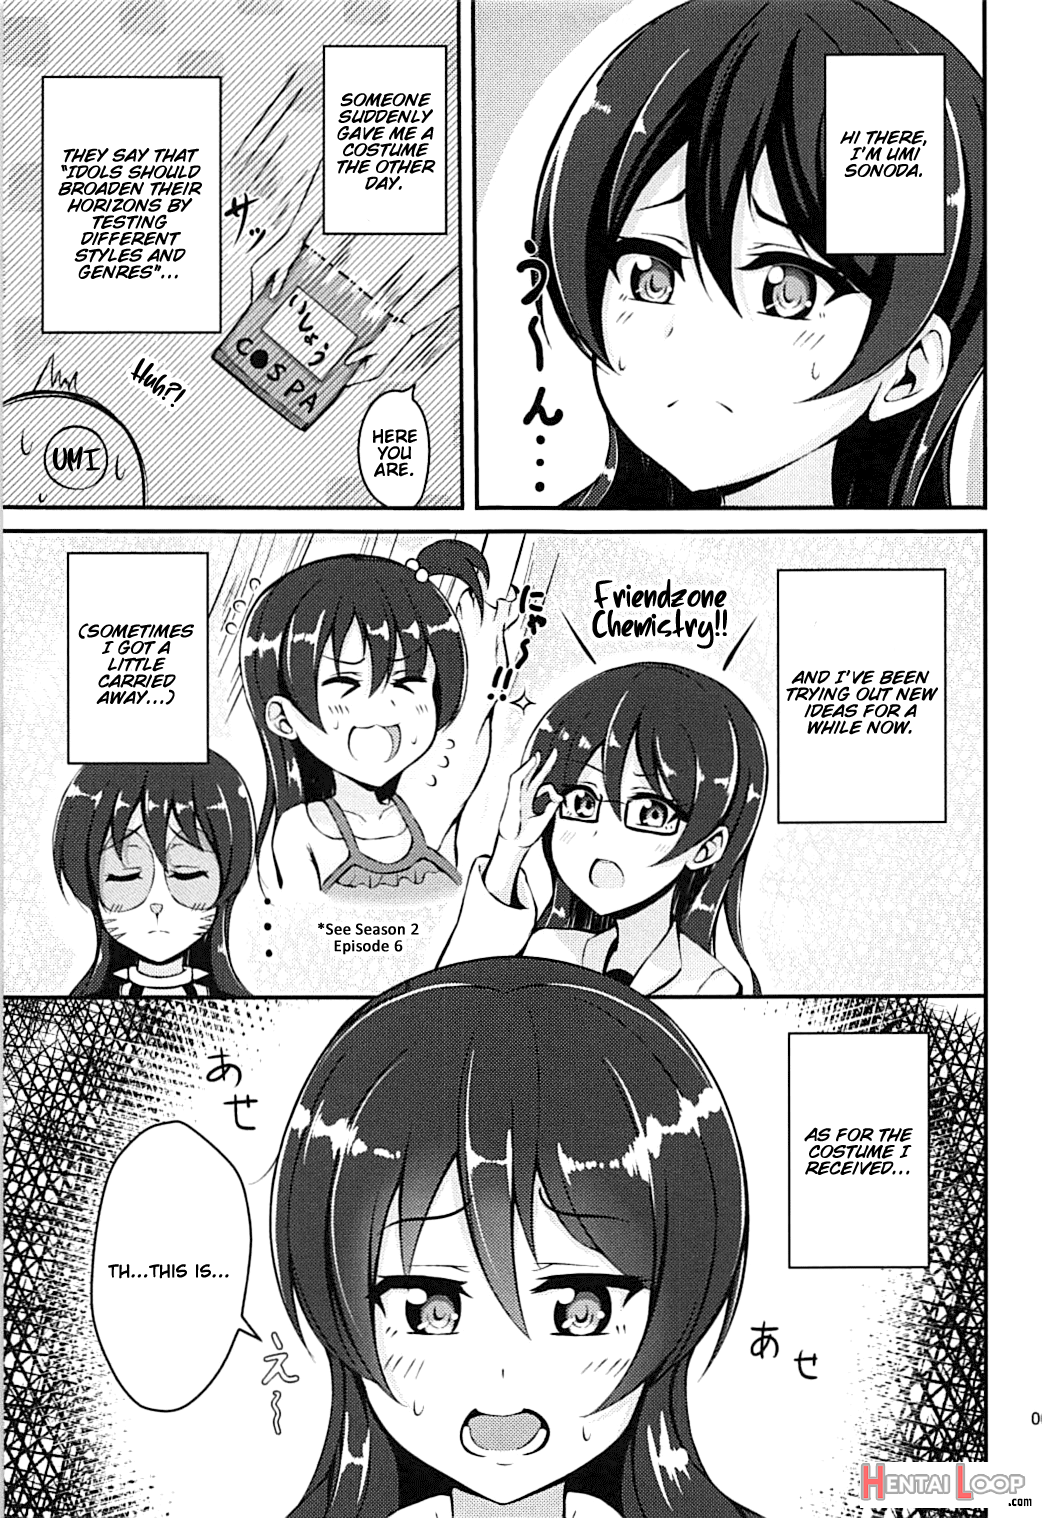 Race To The Finish With Umi-chan!! page 4